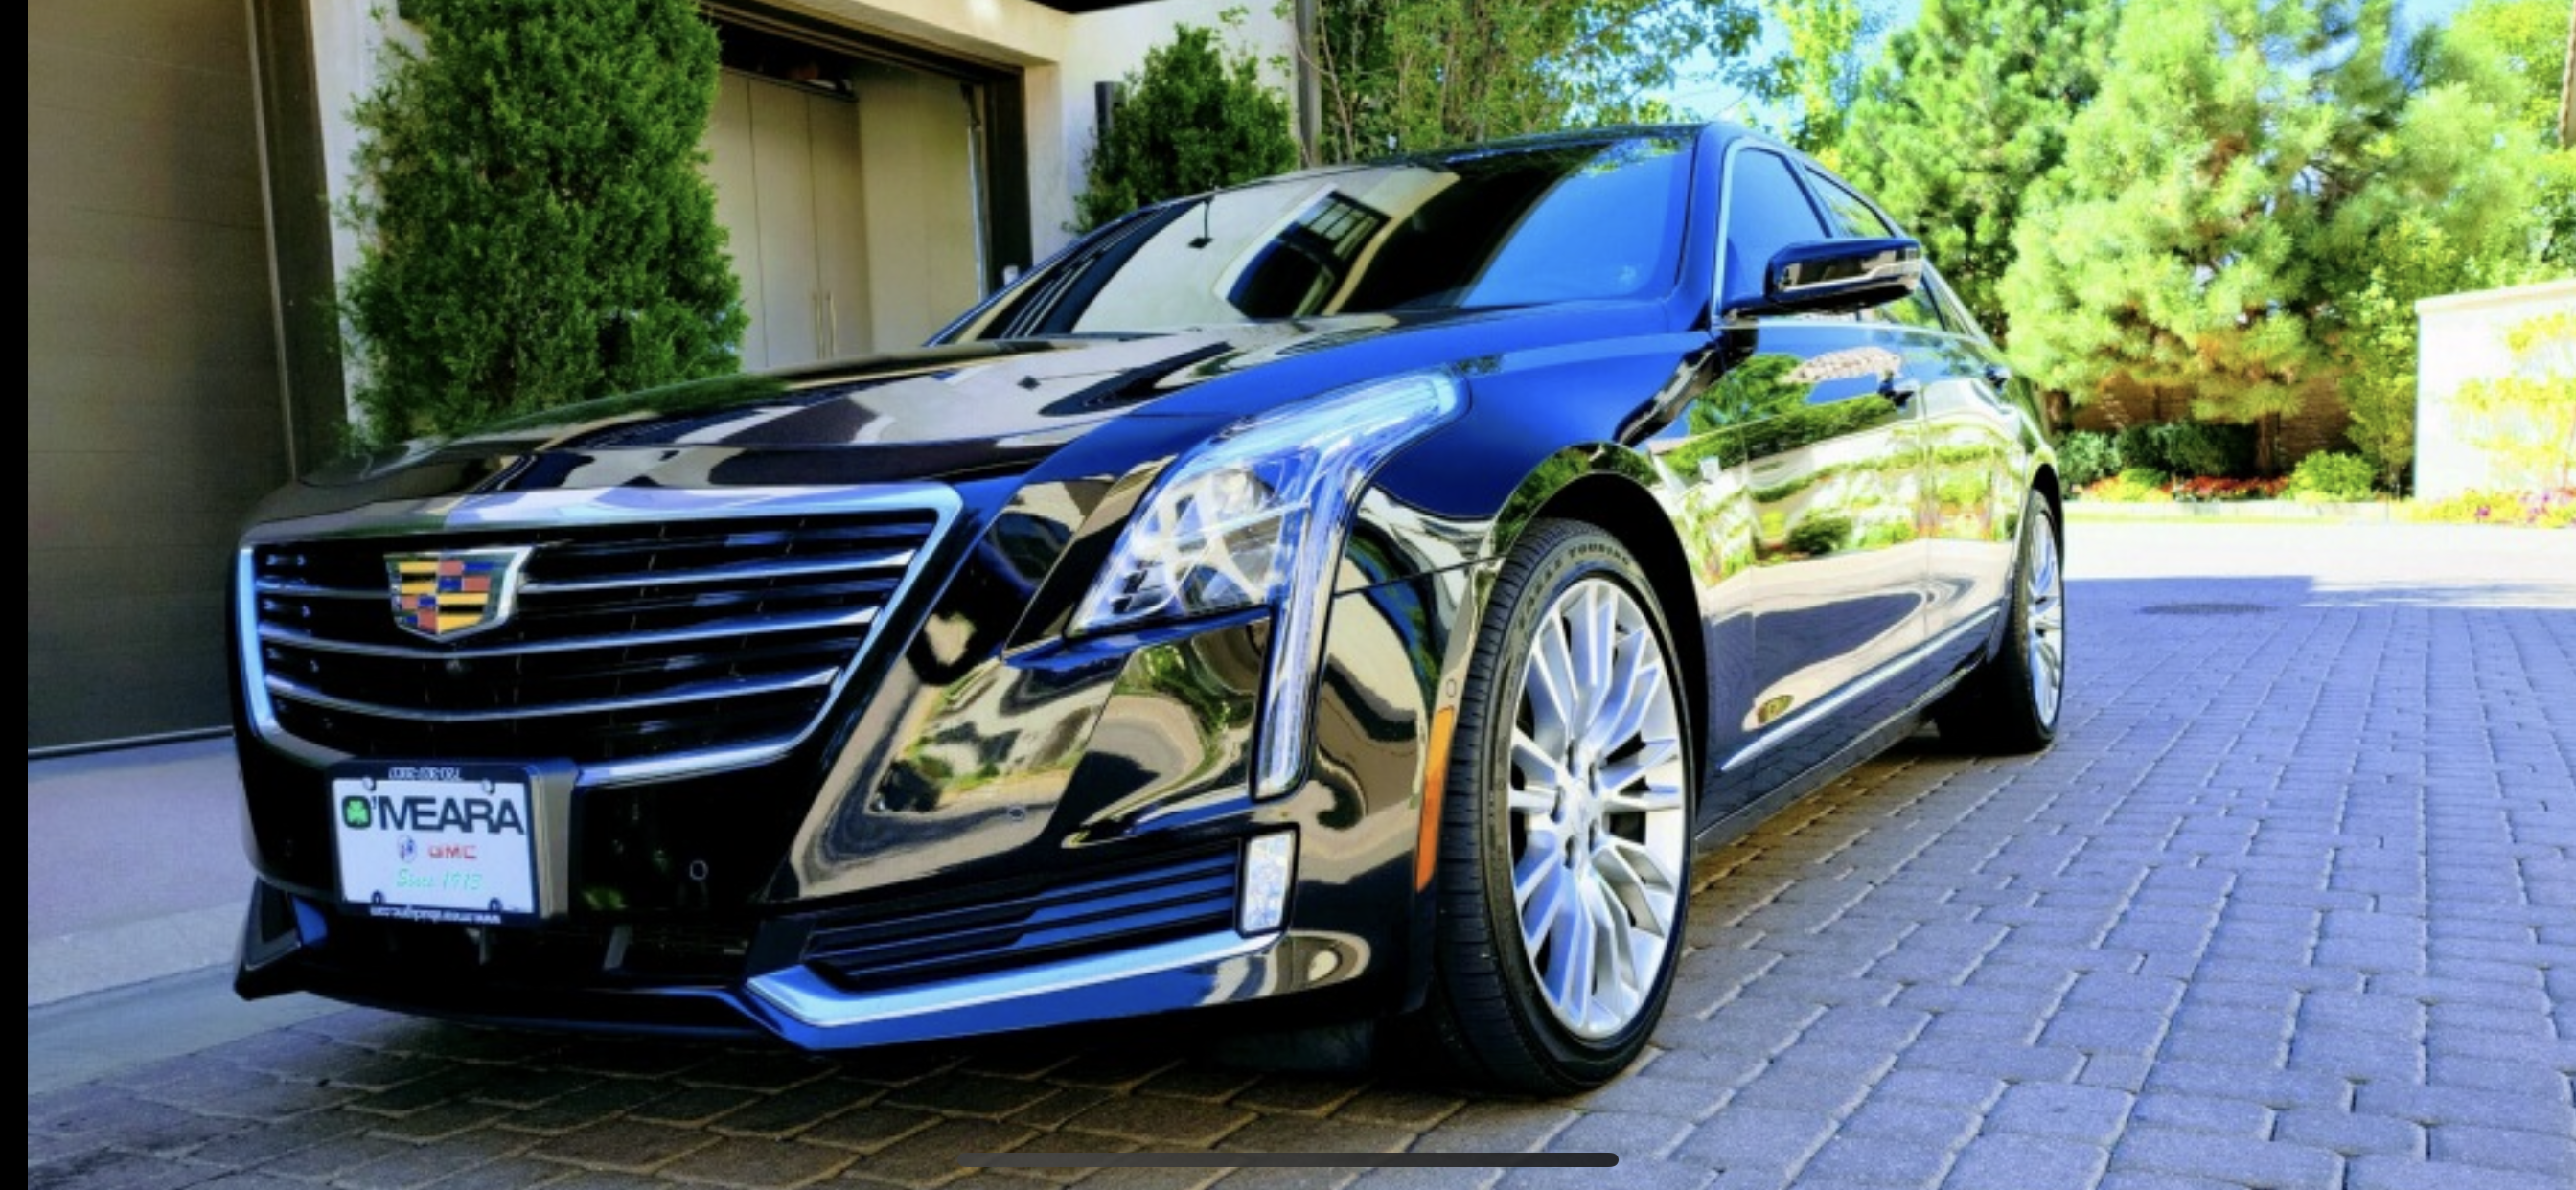 A black Cadillac CT6 with a reflective shine and beautiful wheels.